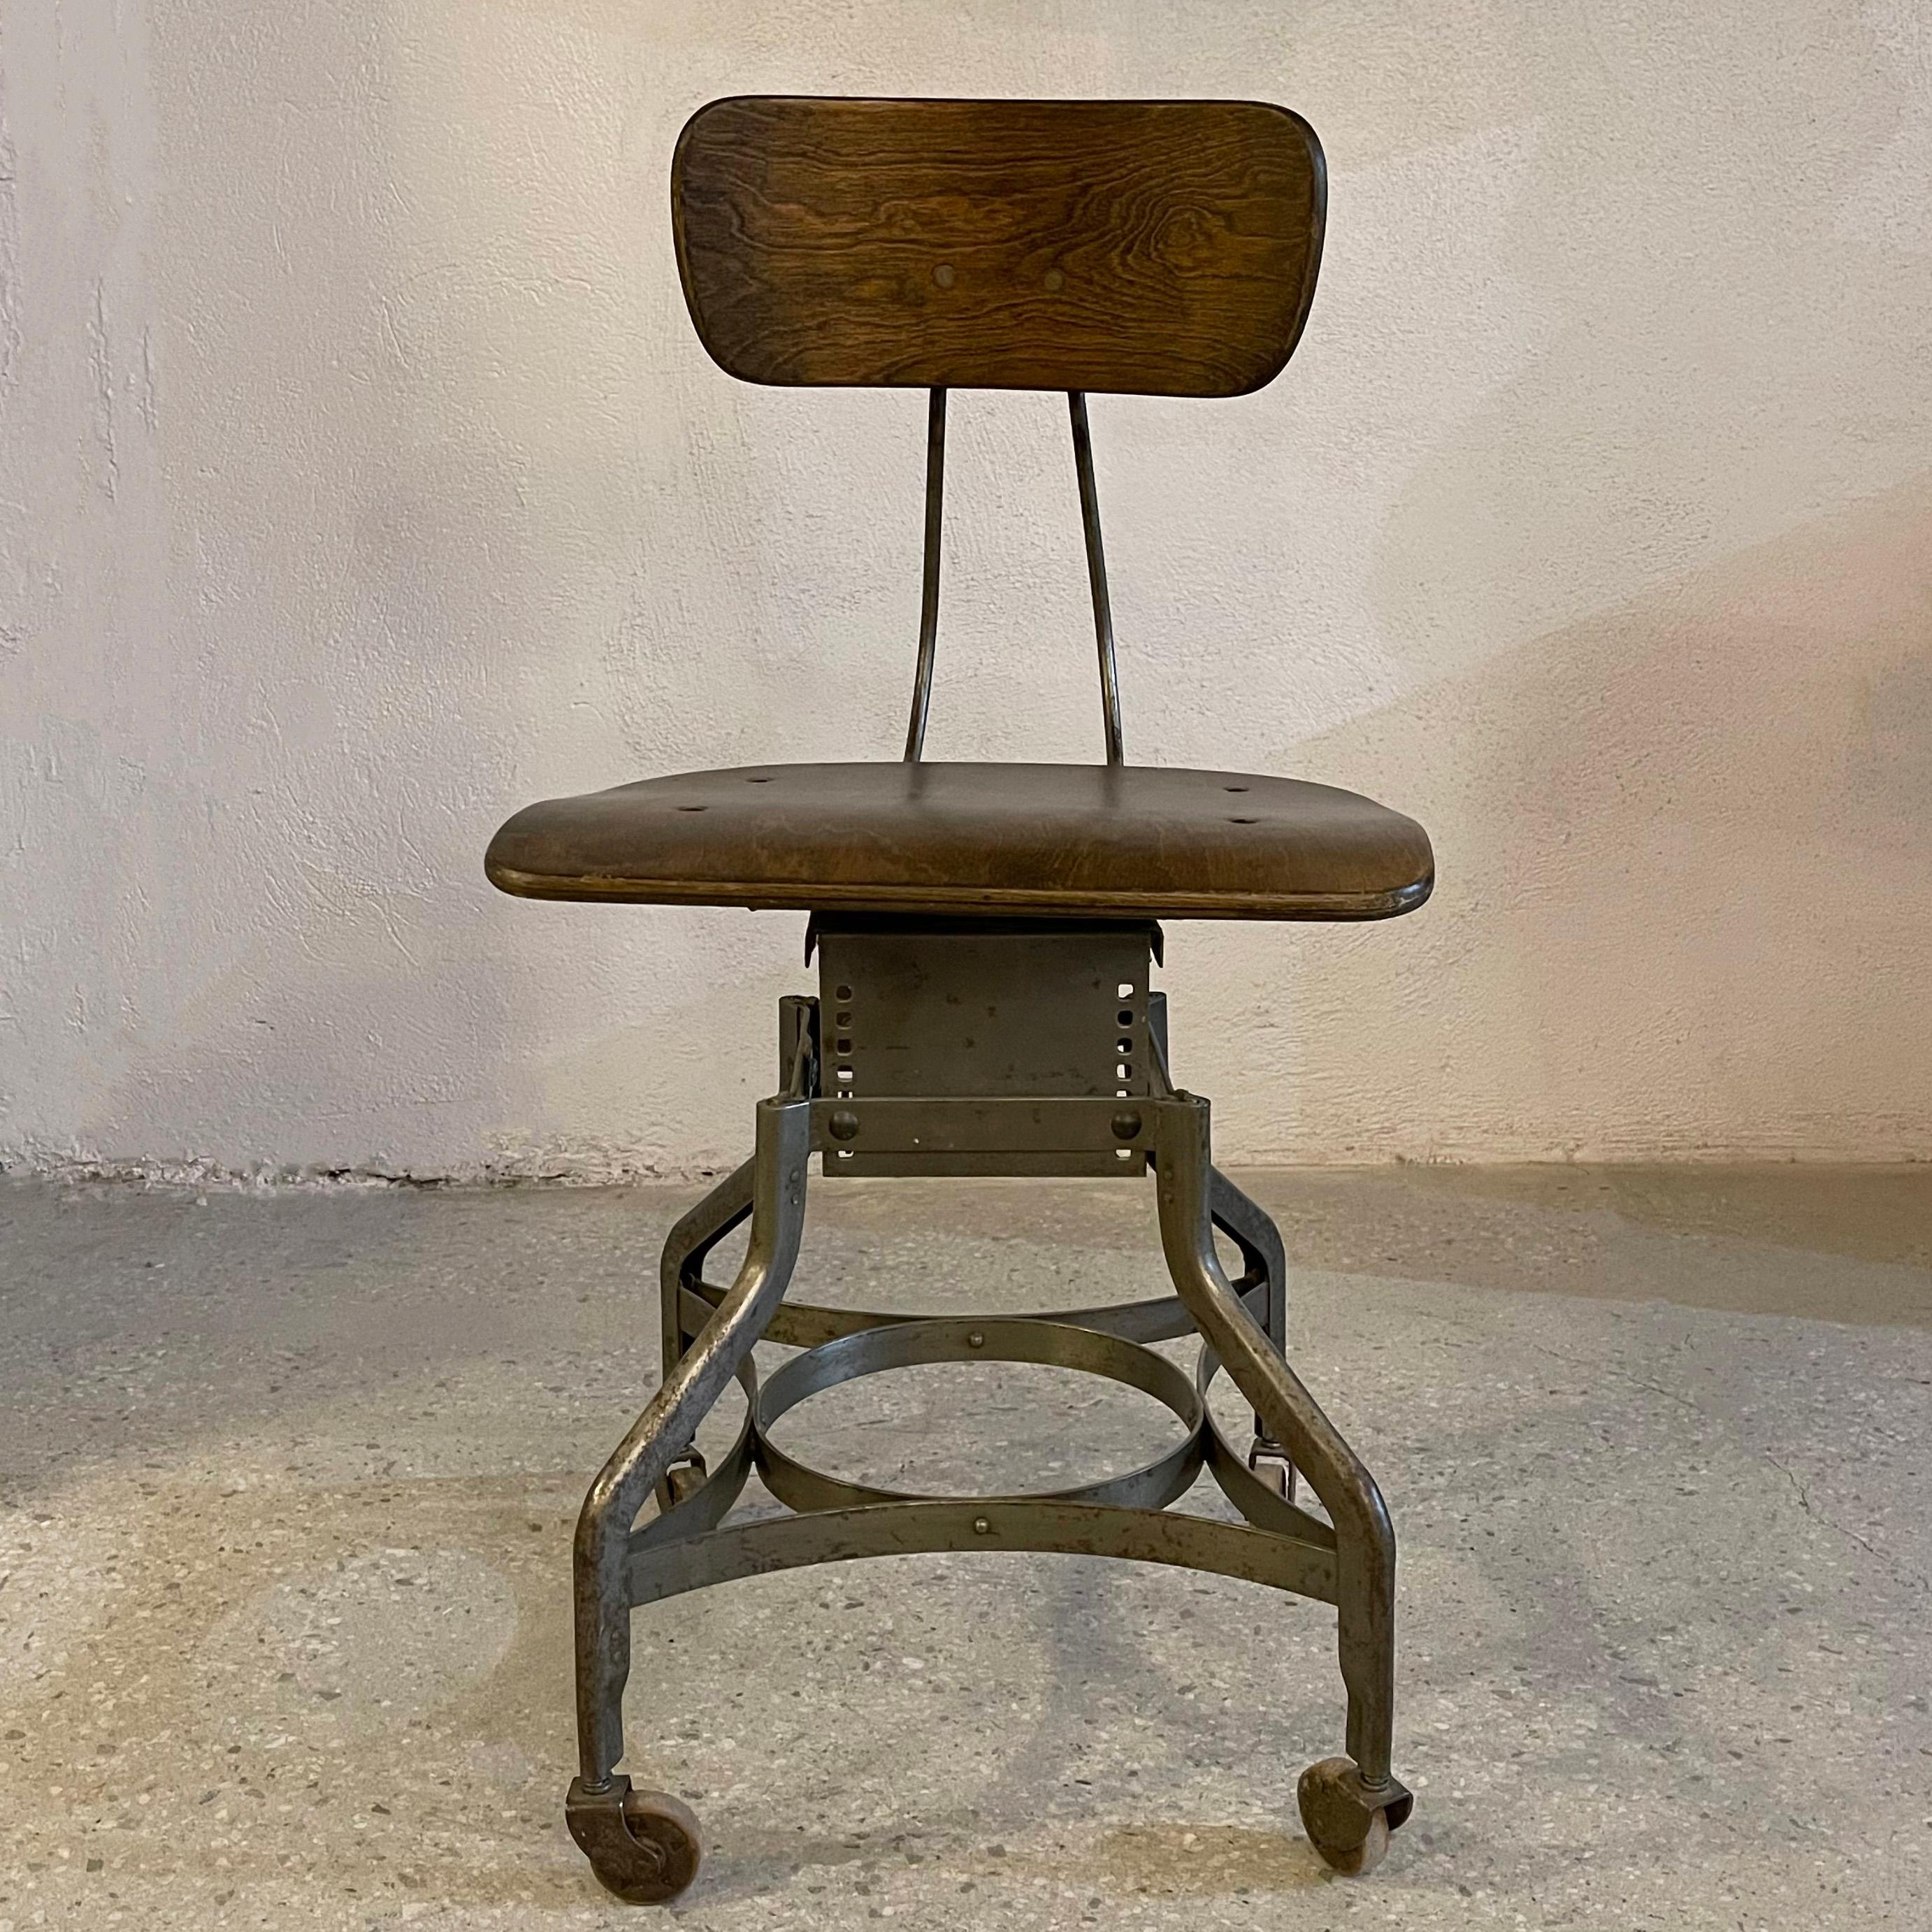 Industrial, rolling, swivel desk chair by the Toledo Metal Furniture Co. features a signature Toledo star, brushed steel base with bent birch ply seat and back. The height is adjustable in 7 increments from 16 - 19 inches by setting the plate under